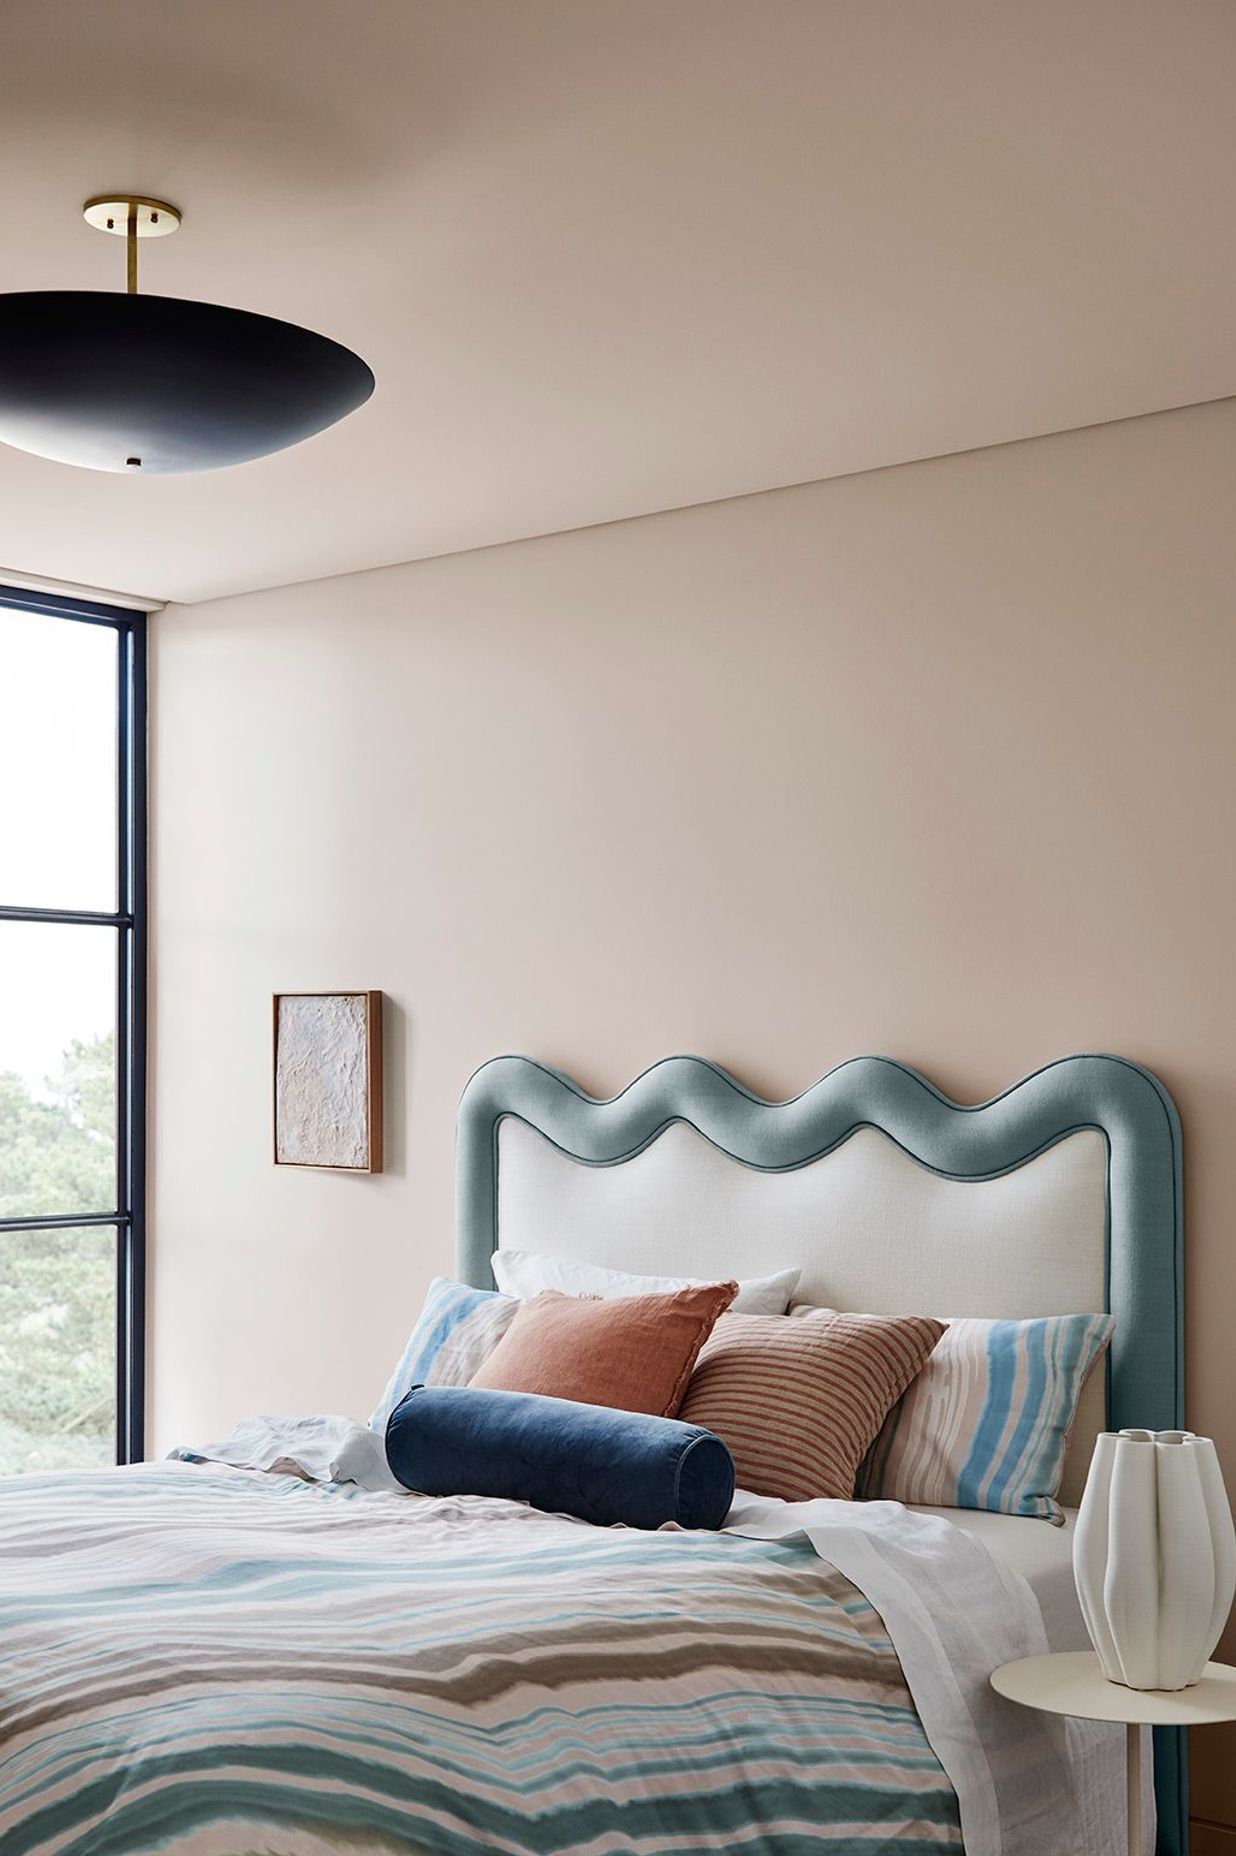 Image supplied by Dulux and features Dulux Dunedin. Styling: Bree Leech; Photography: Lisa Cohen.